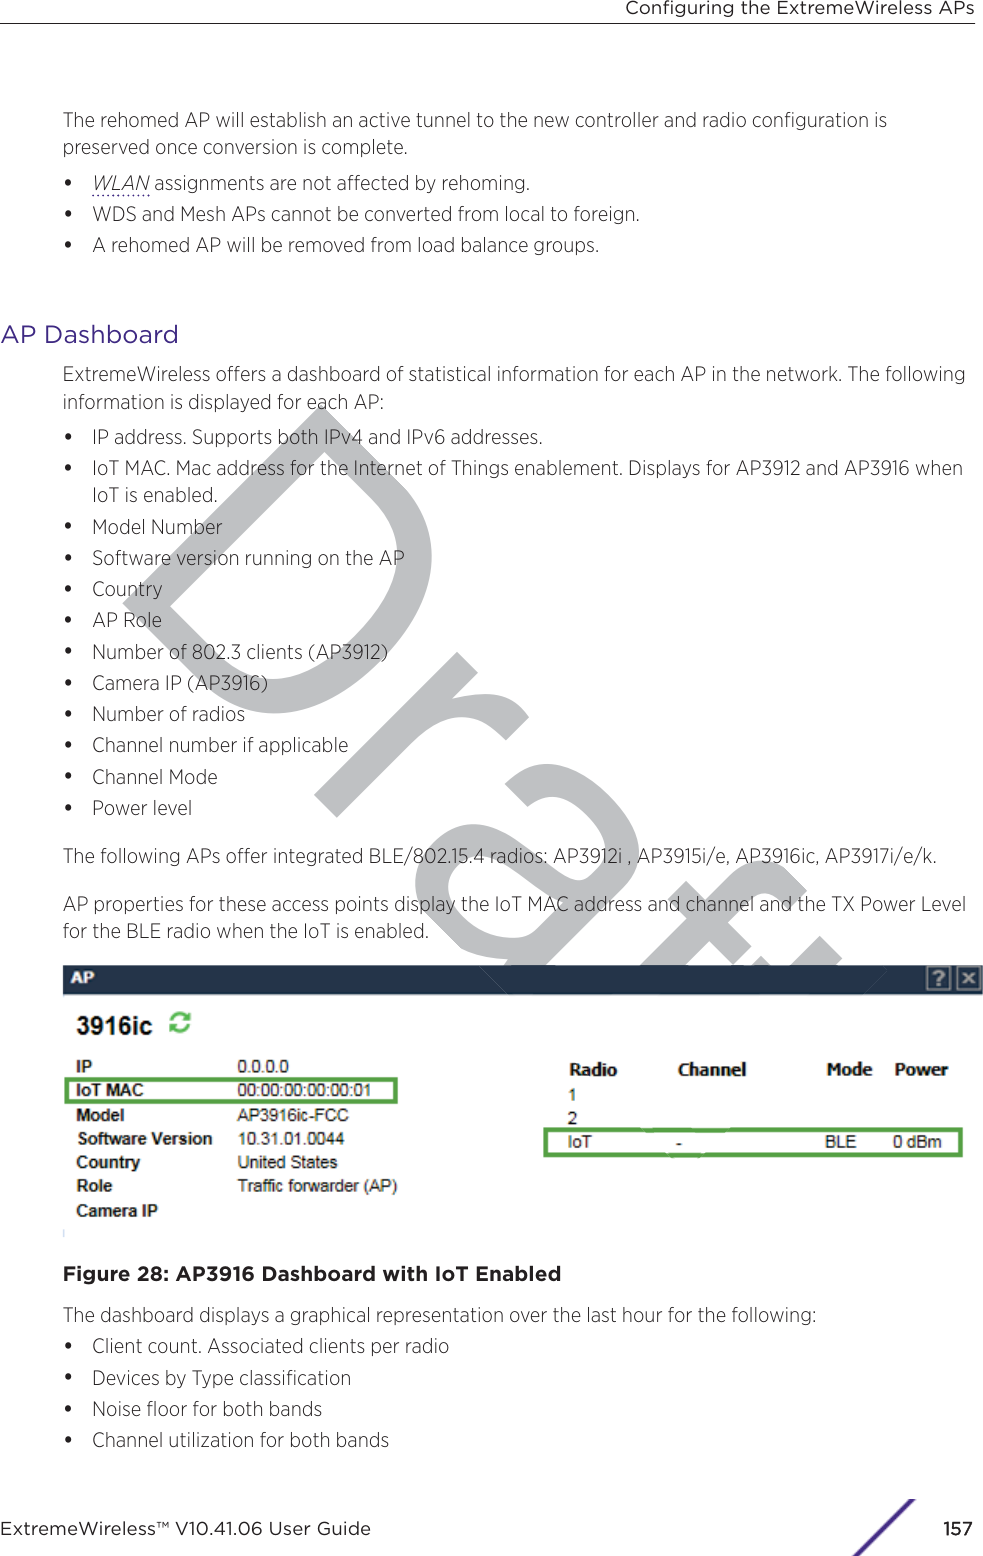 DraftThe rehomed AP will establish an active tunnel to the new controller and radio conﬁguration ispreserved once conversion is complete.•WLAN assignments are not aected by rehoming.•WDS and Mesh APs cannot be converted from local to foreign.•A rehomed AP will be removed from load balance groups.AP DashboardExtremeWireless oers a dashboard of statistical information for each AP in the network. The followinginformation is displayed for each AP:•IP address. Supports both IPv4 and IPv6 addresses.•IoT MAC. Mac address for the Internet of Things enablement. Displays for AP3912 and AP3916 whenIoT is enabled.•Model Number•Software version running on the AP•Country•AP Role•Number of 802.3 clients (AP3912)•Camera IP (AP3916)•Number of radios•Channel number if applicable•Channel Mode•Power levelThe following APs oer integrated BLE/802.15.4 radios: AP3912i , AP3915i/e, AP3916ic, AP3917i/e/k.AP properties for these access points display the IoT MAC address and channel and the TX Power Levelfor the BLE radio when the IoT is enabled.Figure 28: AP3916 Dashboard with IoT EnabledThe dashboard displays a graphical representation over the last hour for the following:•Client count. Associated clients per radio•Devices by Type classiﬁcation•Noise ﬂoor for both bands•Channel utilization for both bandsConﬁguring the ExtremeWireless APsExtremeWireless™ V10.41.06 User Guide157